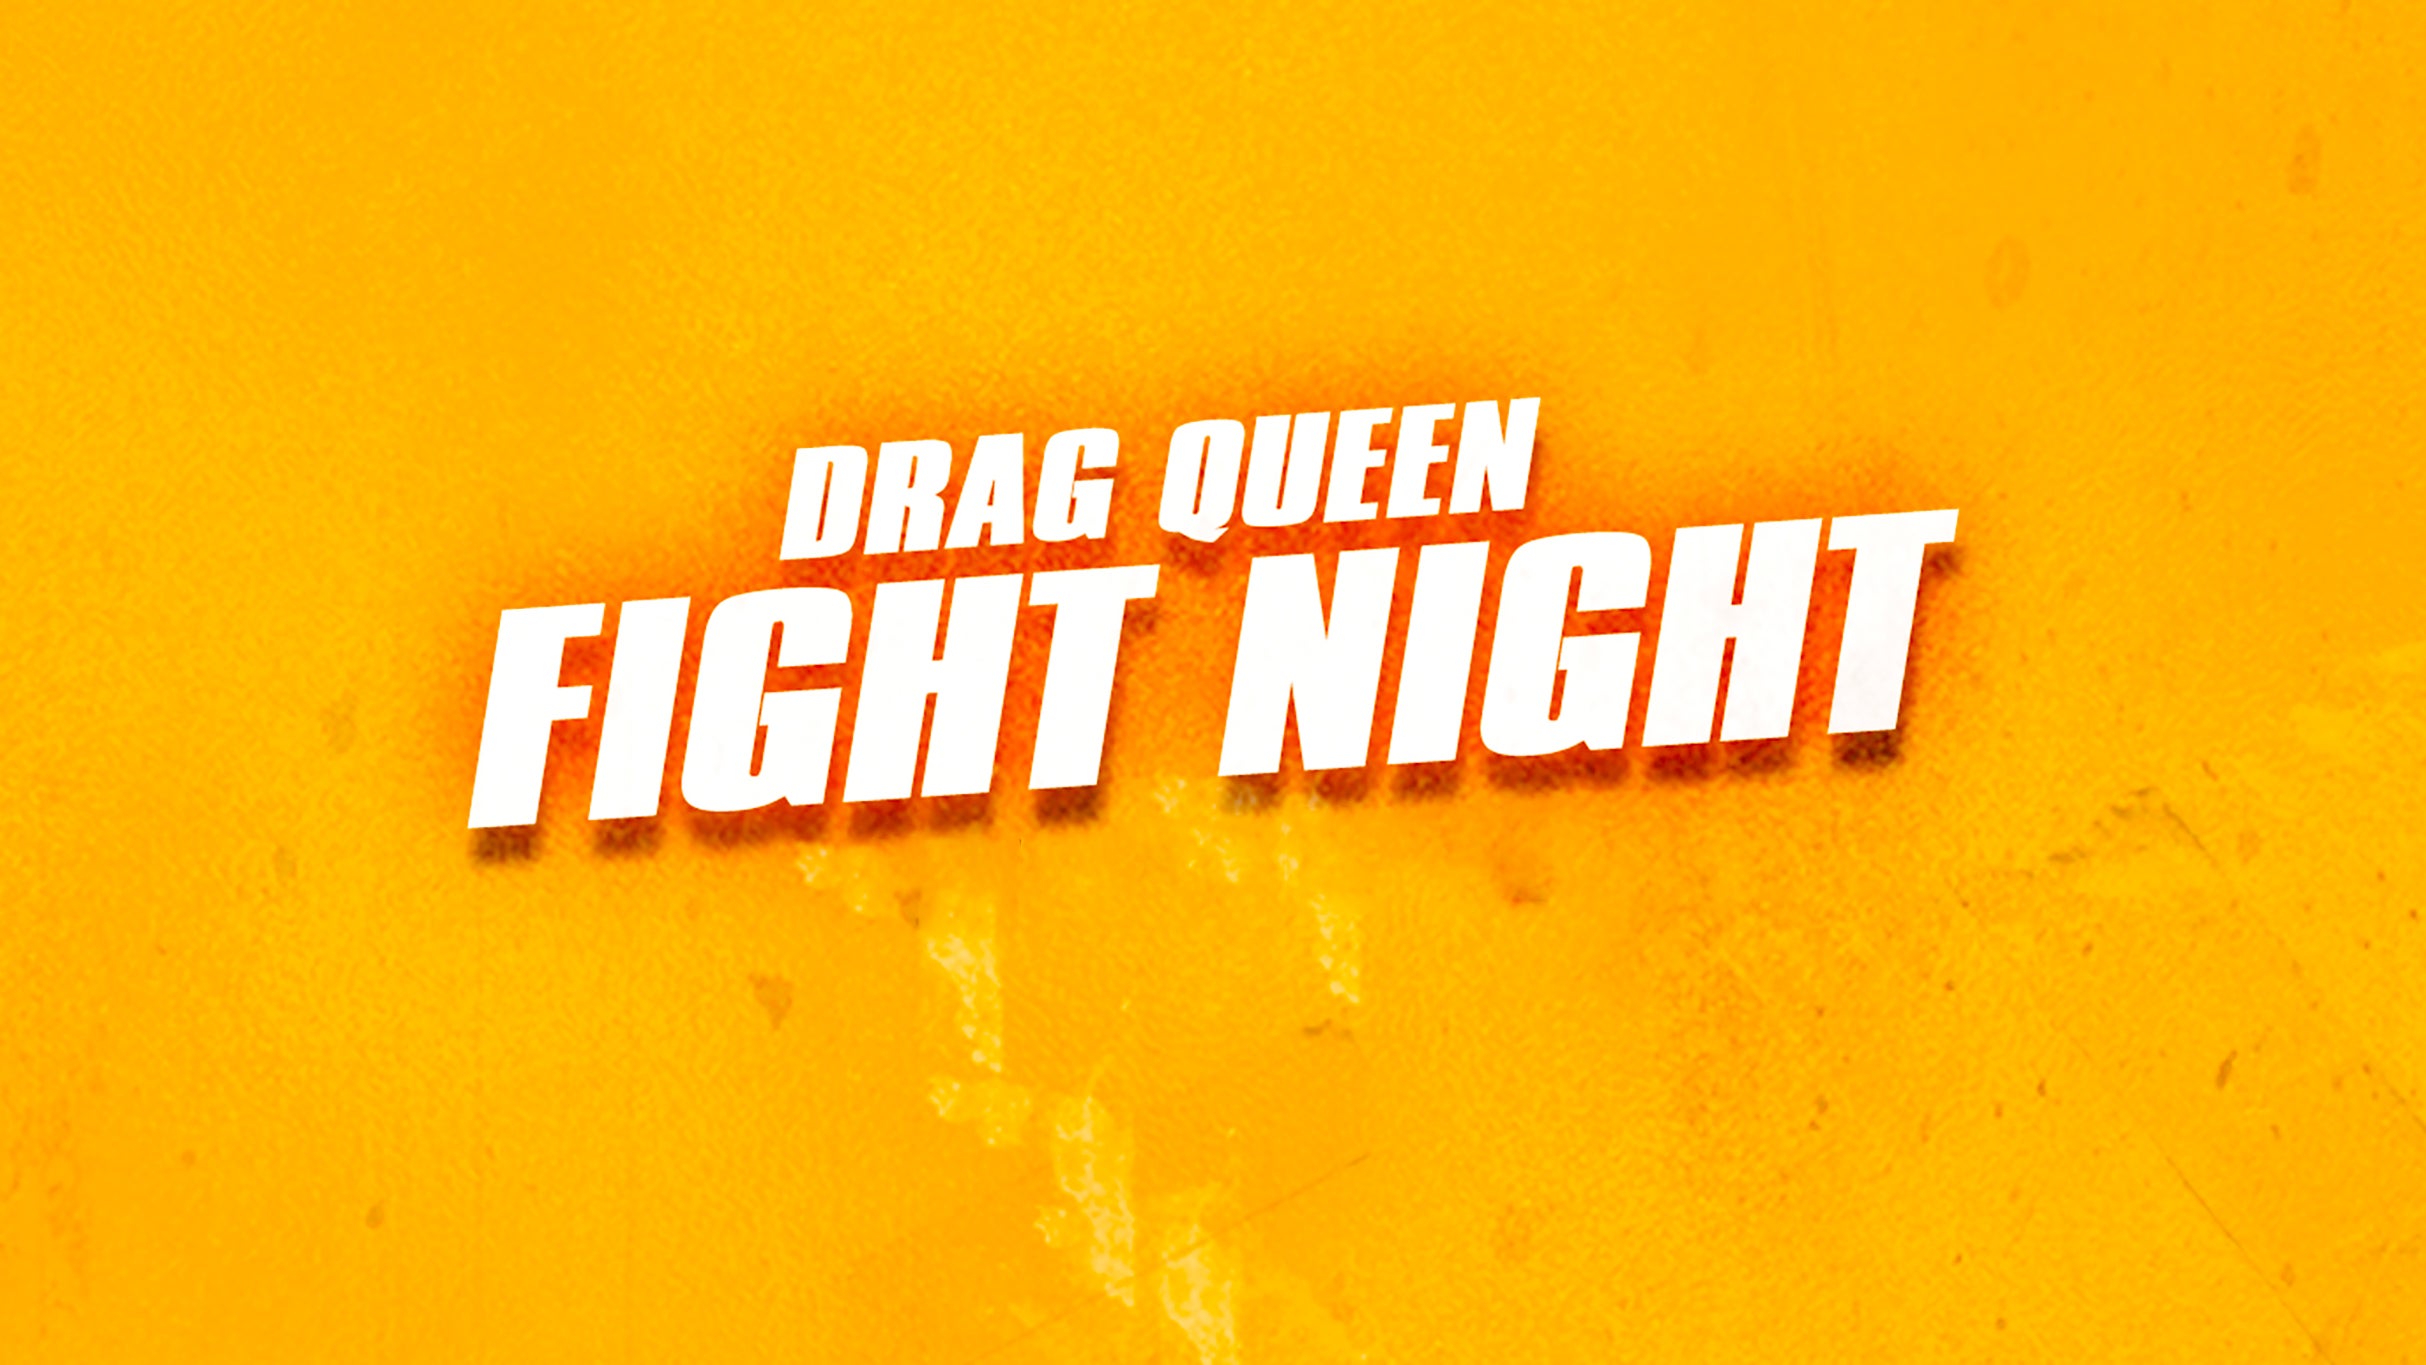 Drag Queen Fight Night with Carson Kressley in Bethlehem promo photo for 4 or More Standing GA presale offer code